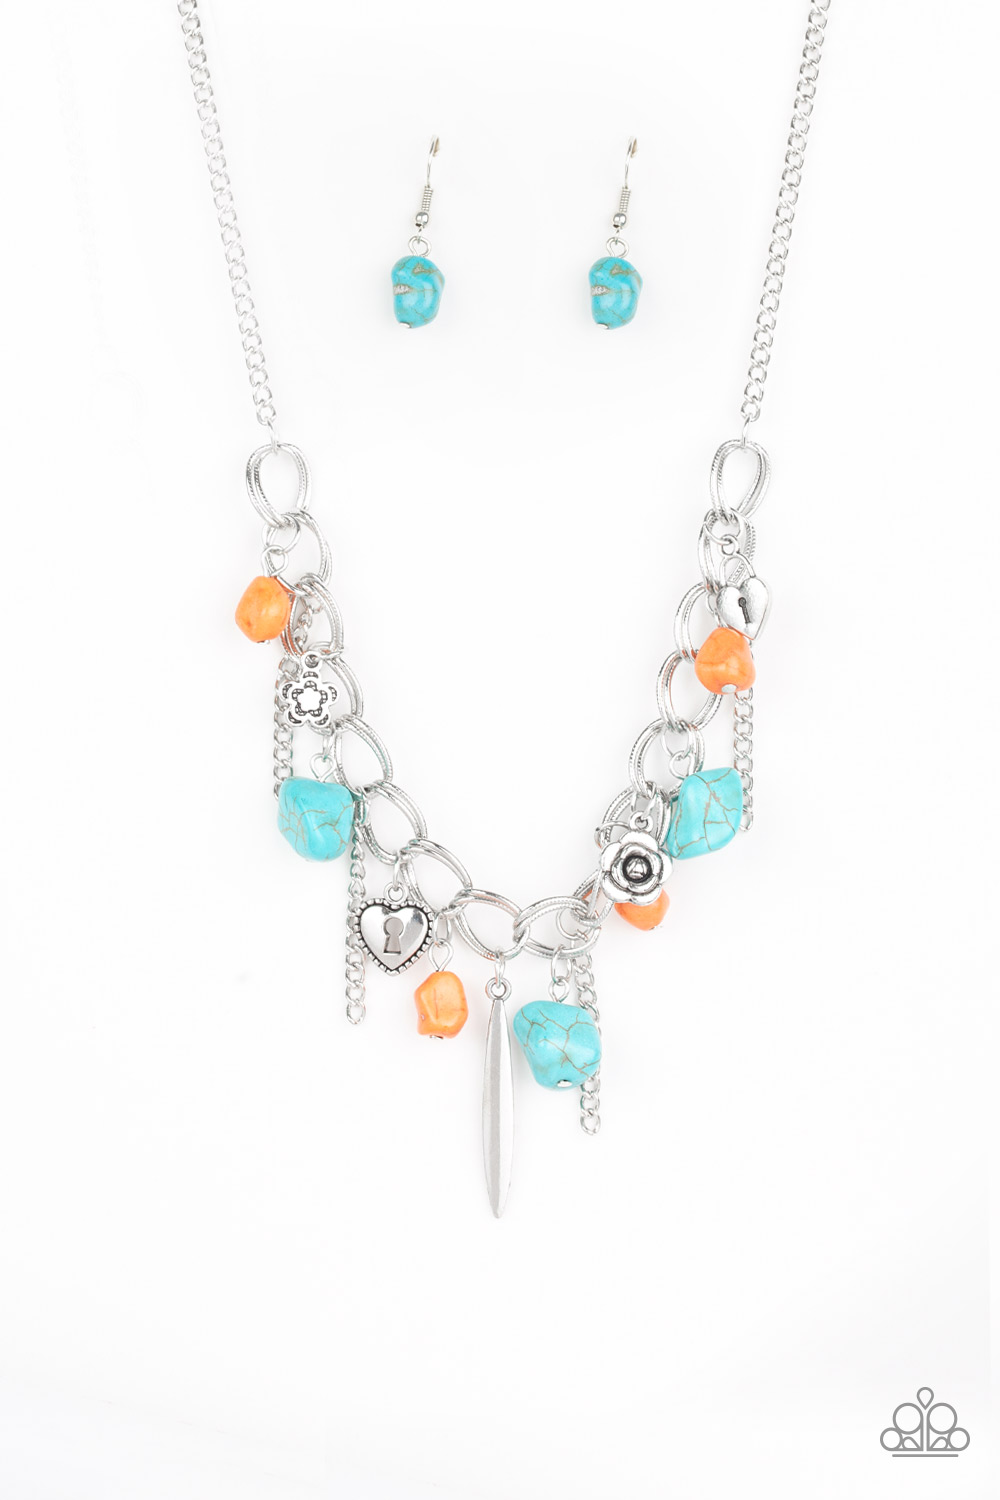 Necklace - Southern Sweetheart - Multi